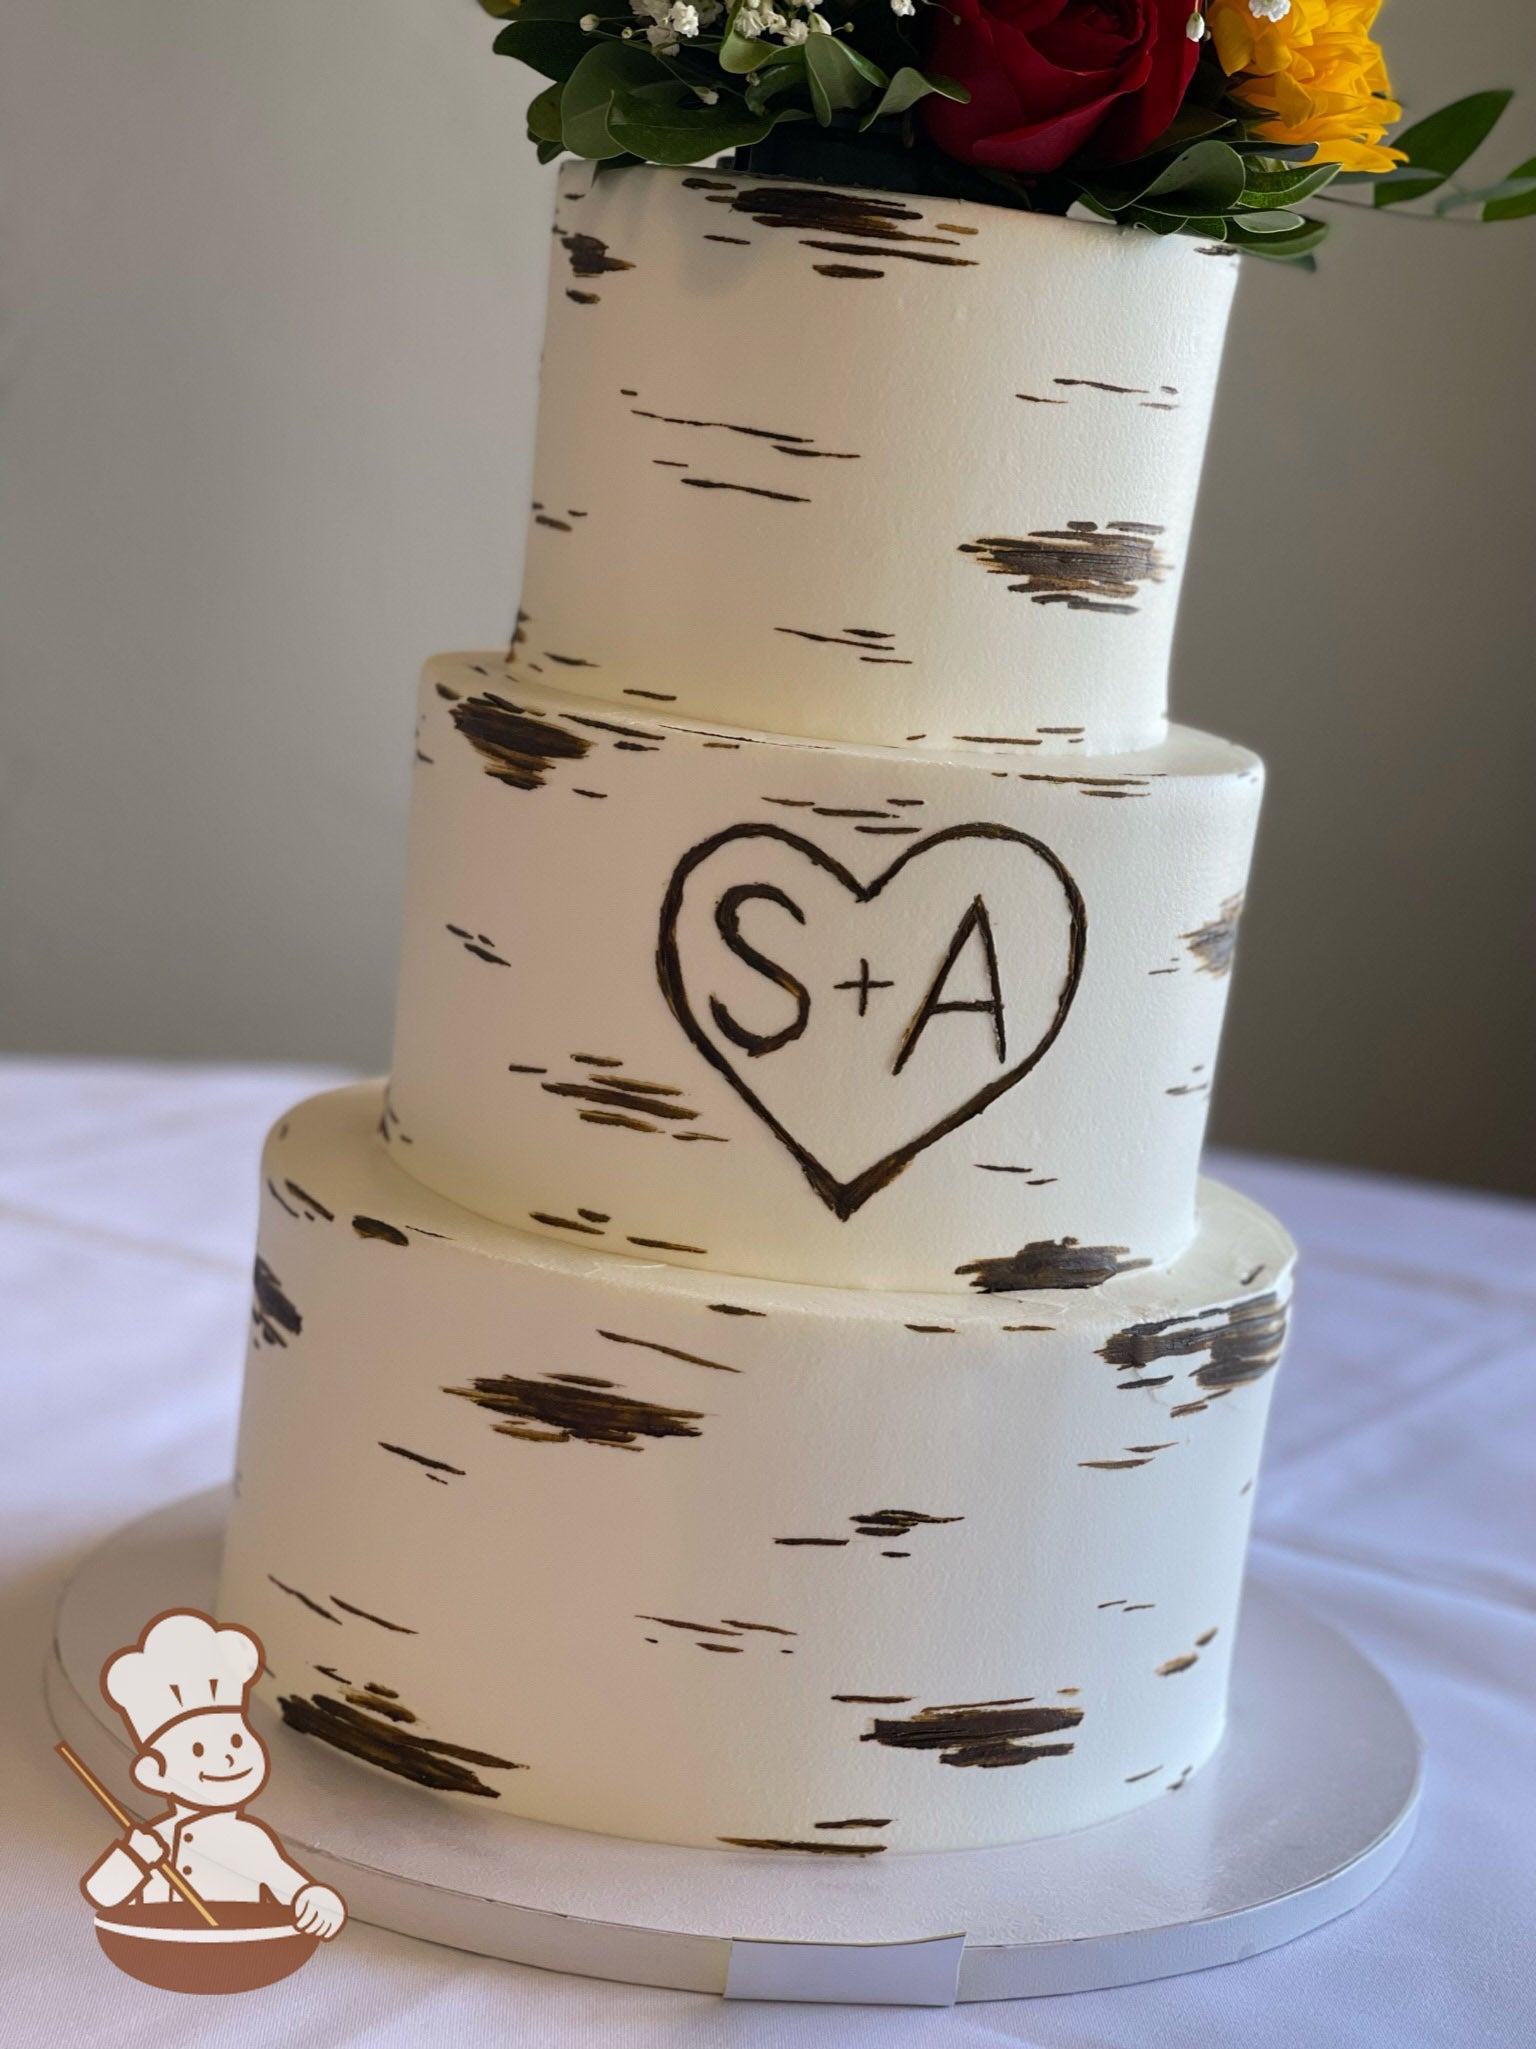 3-tier cake with smooth white icing and decorated with a painted wood grain look and a heart with the initials S + A.